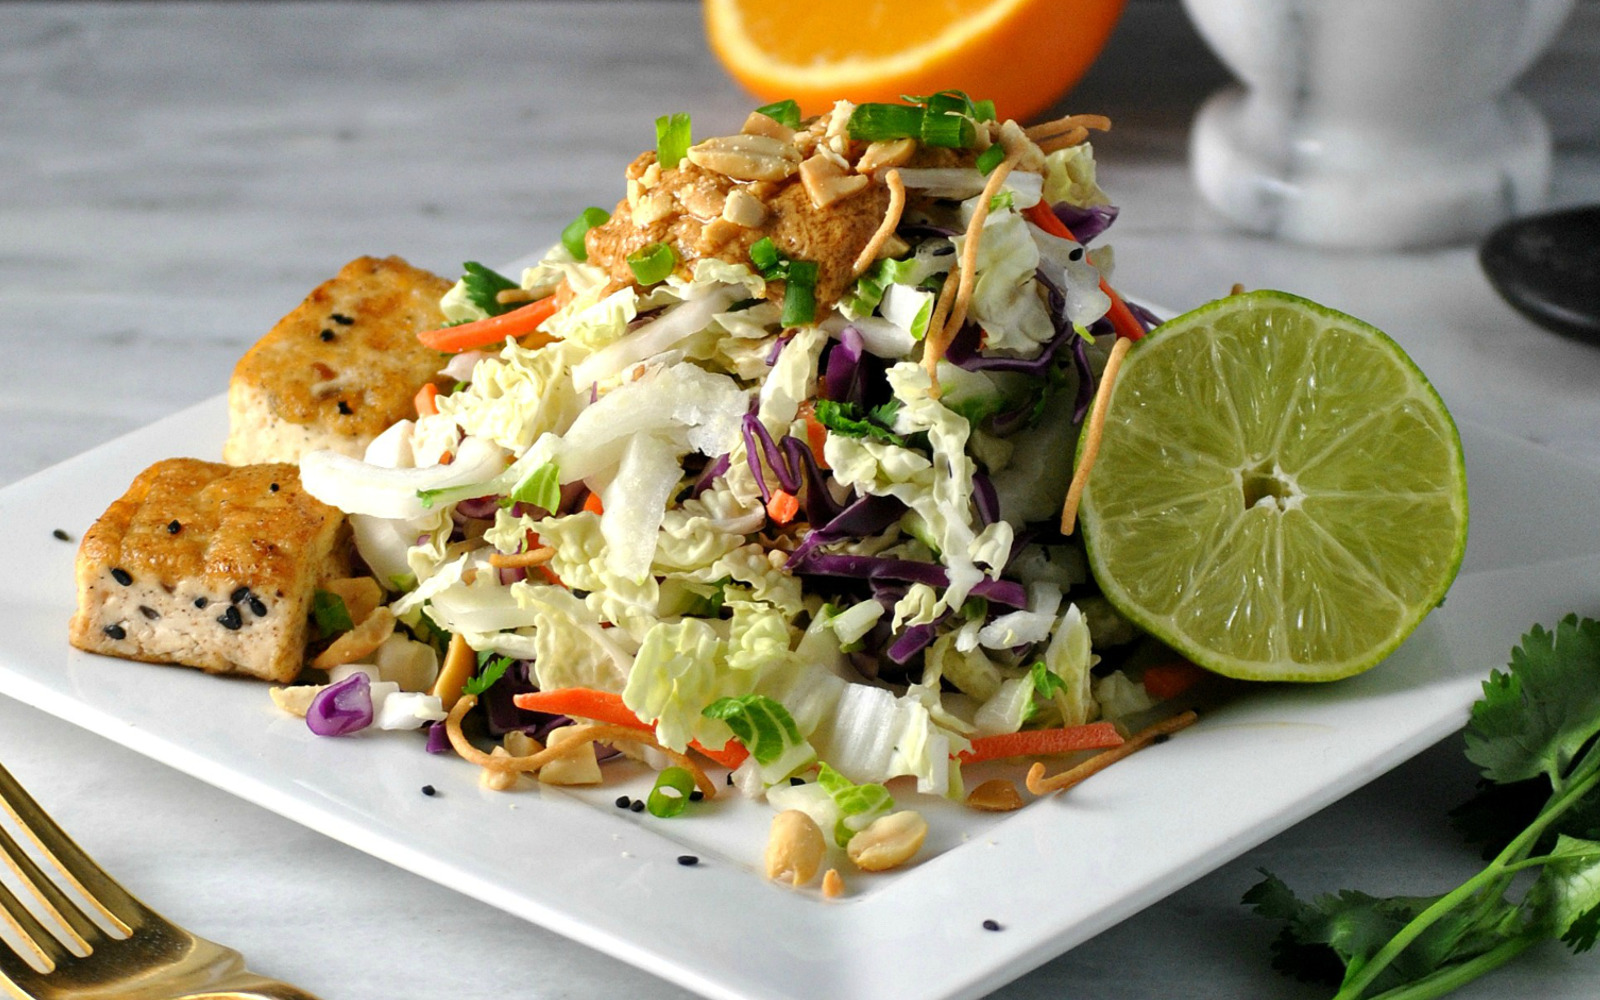 Chinese Cabbage Salad With Tofu and Spicy Peanut Dressing